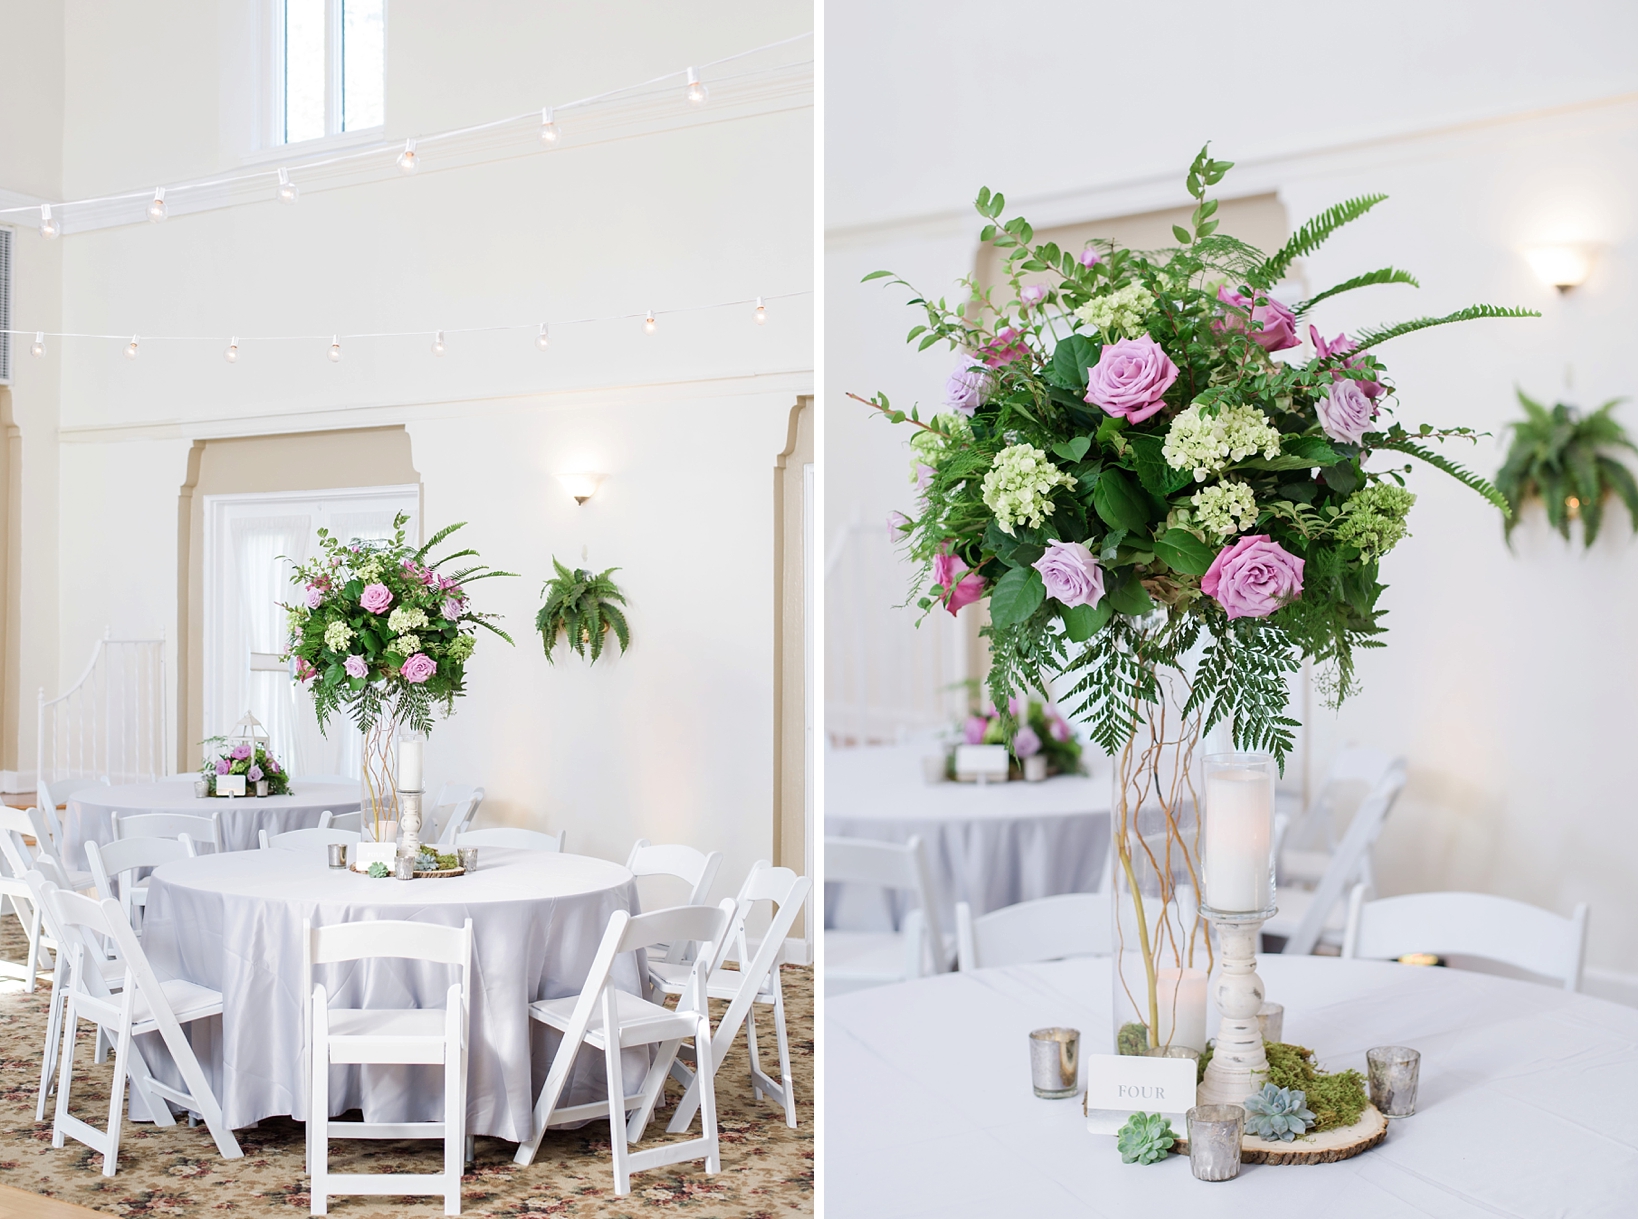 The reception space with floral centerpieces and succulents